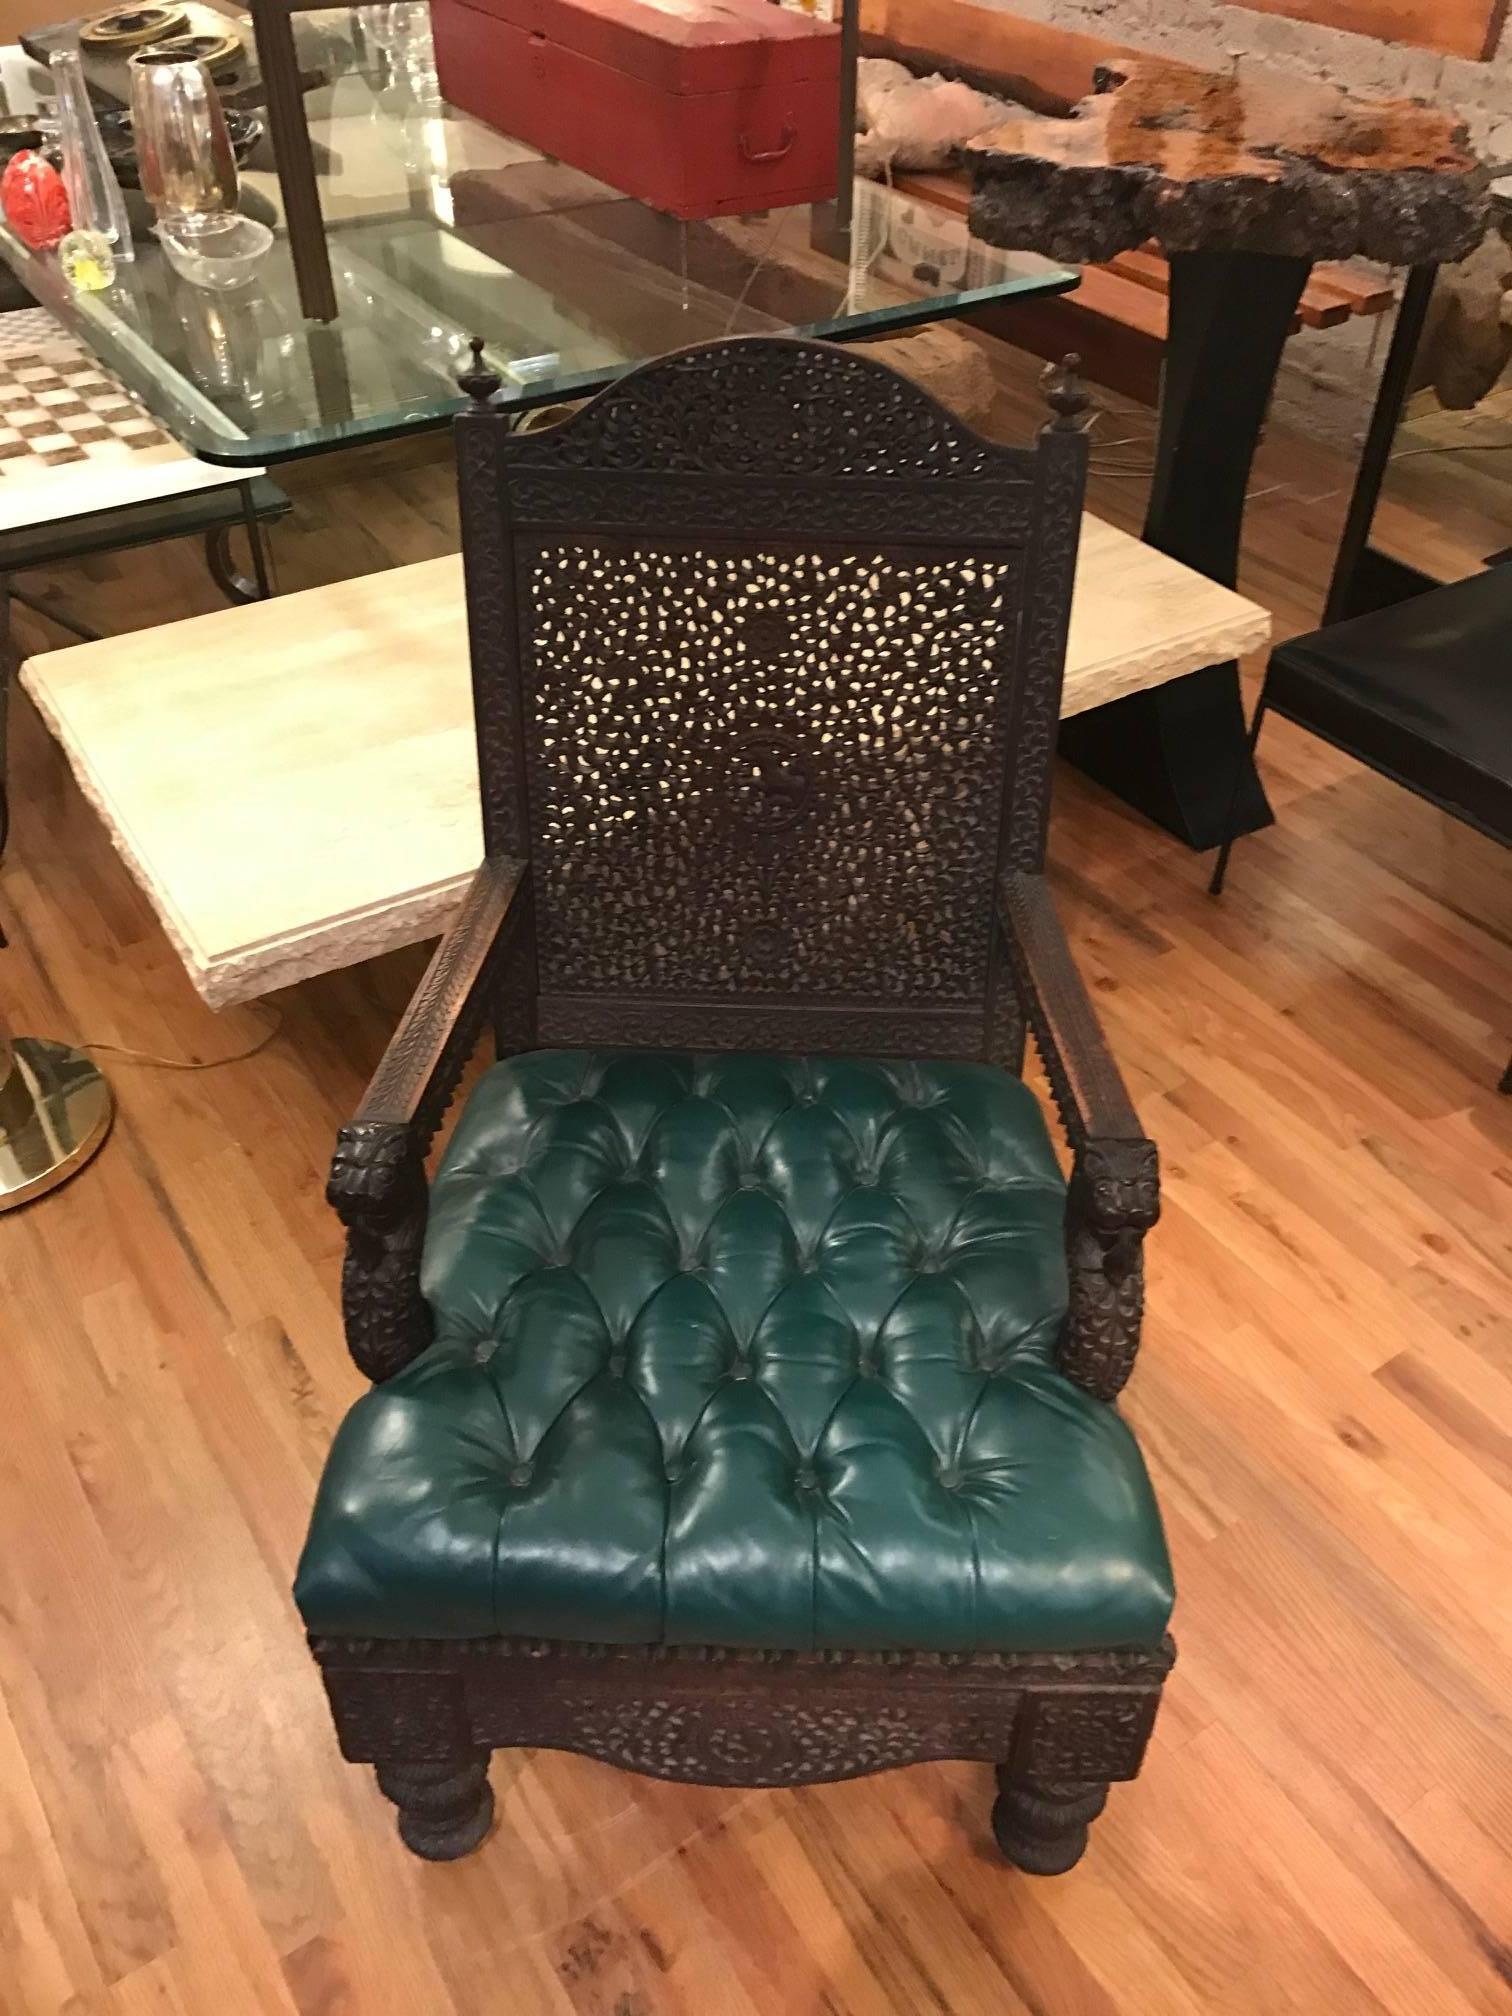 Anglo Indian arm chair with intricate carved stylized foliage throughout. The arms terminate in fanciful lion heads. Beautiful curved apron supported by baluster formed legs. The Chesterfield tufted style seat is upholstered in supple leather.